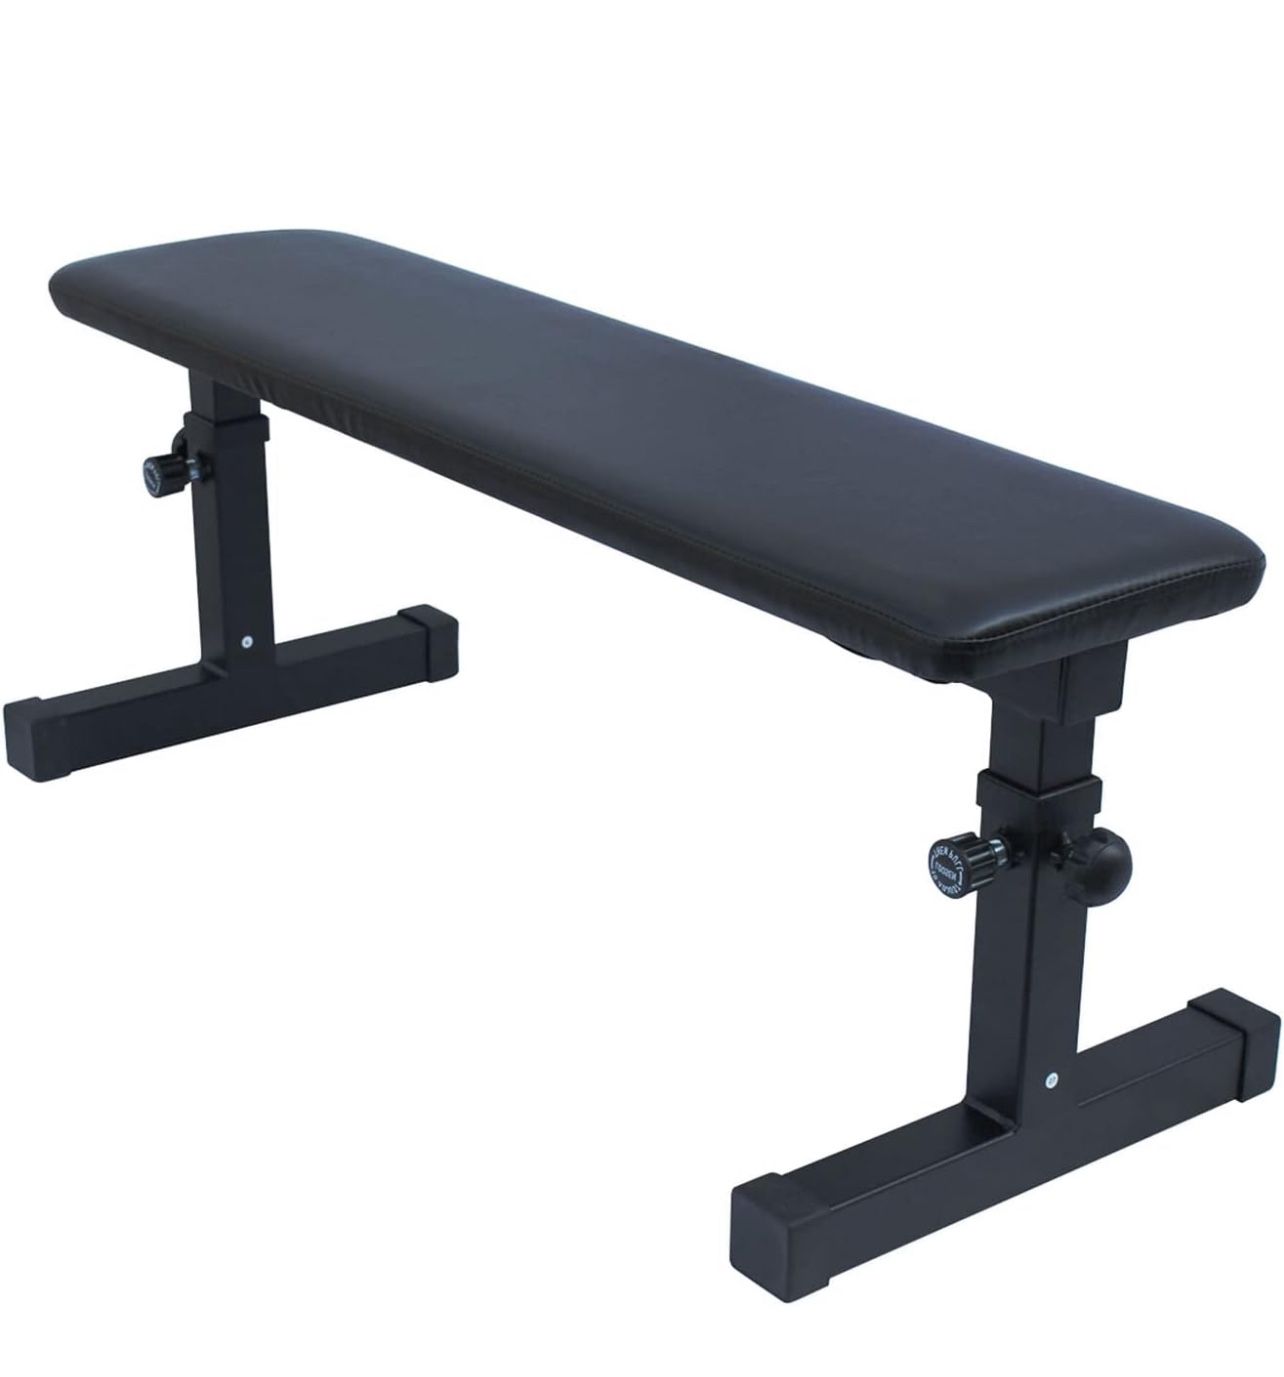 Icoud Flat Weight Bench Utility Workout Adjustable Height Bench for Strength Training Exercise & Fitness